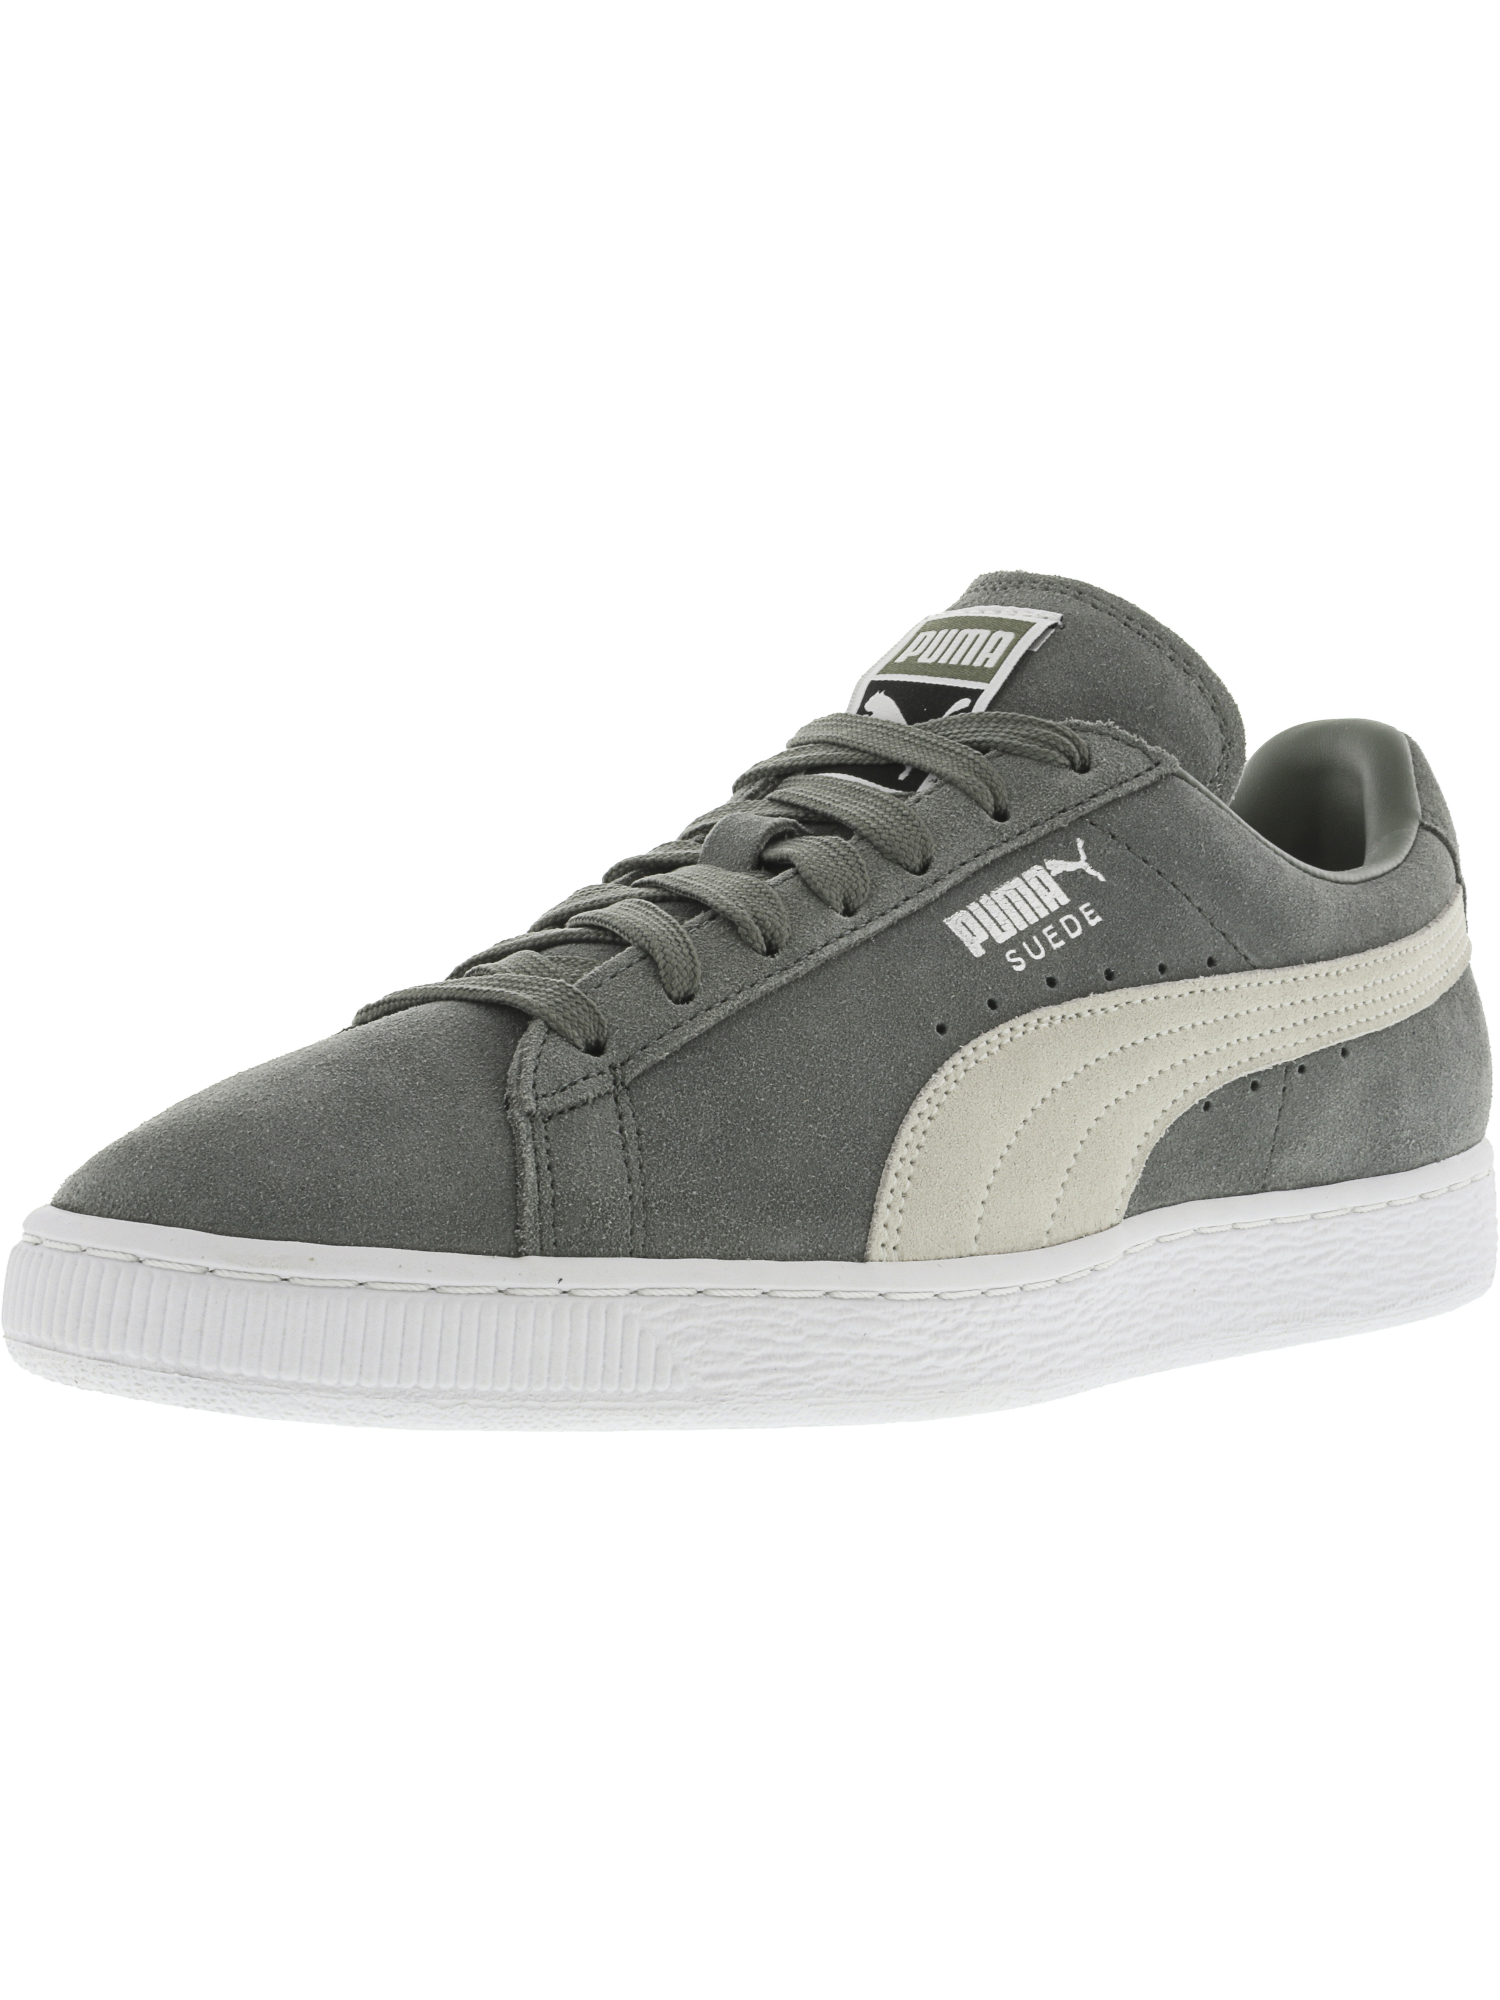 Puma Men's Classic + Suede Ankle-High Leather Fashion Sneaker | eBay